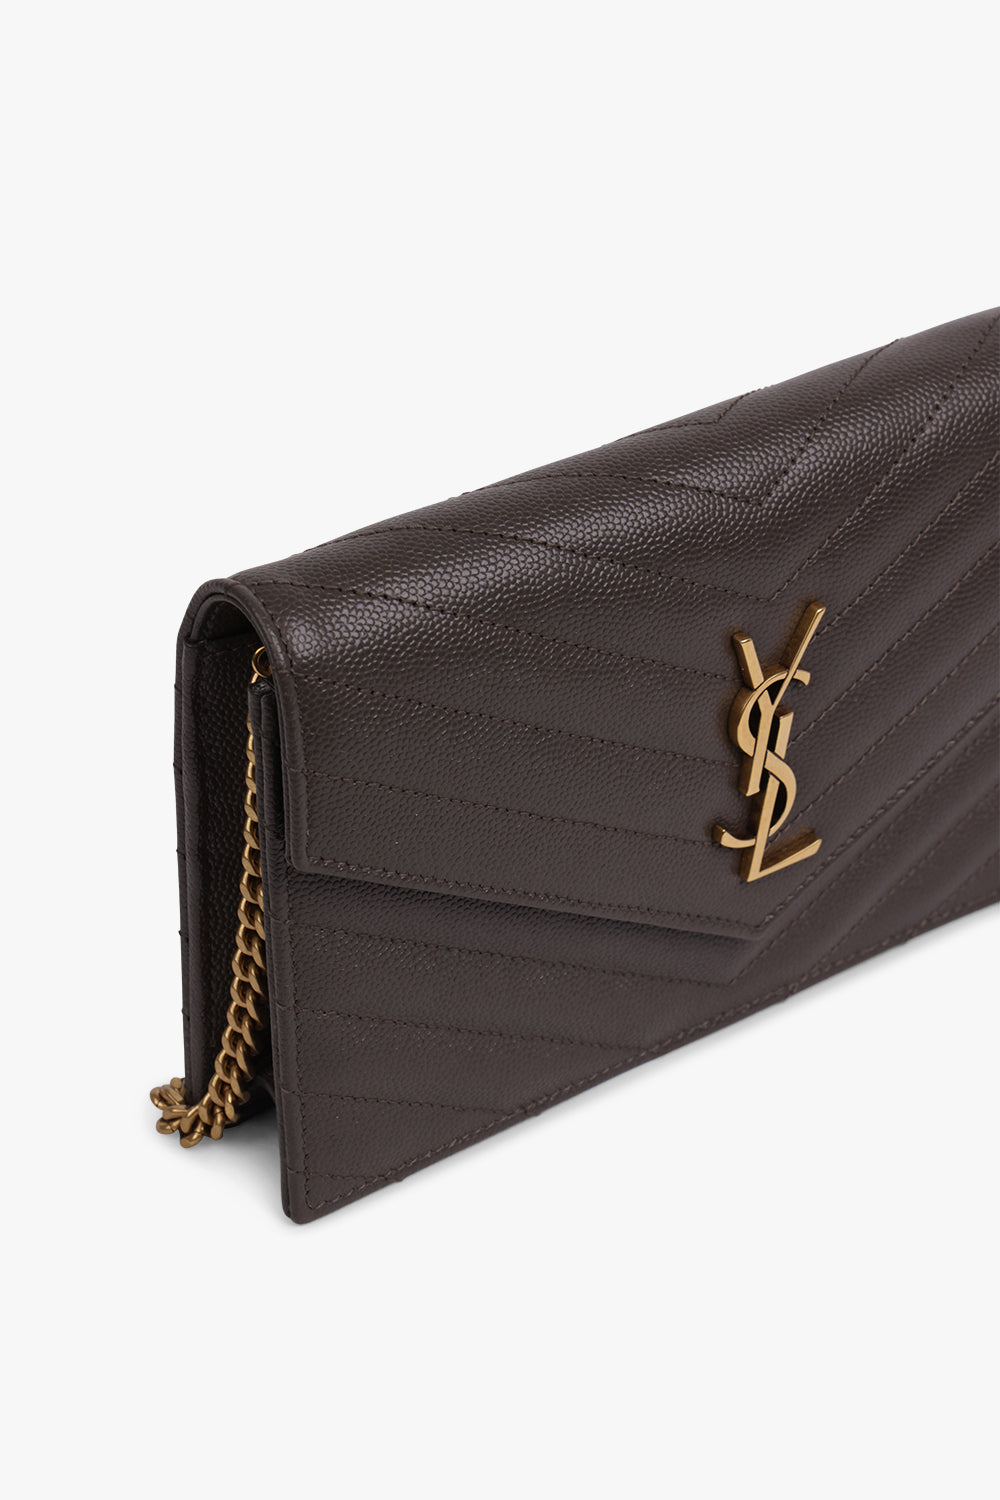 SAINT LAURENT SMALL MONOGRAMME QUILTED CHAIN WALLET PEBBLE GOLD ONLINE ...